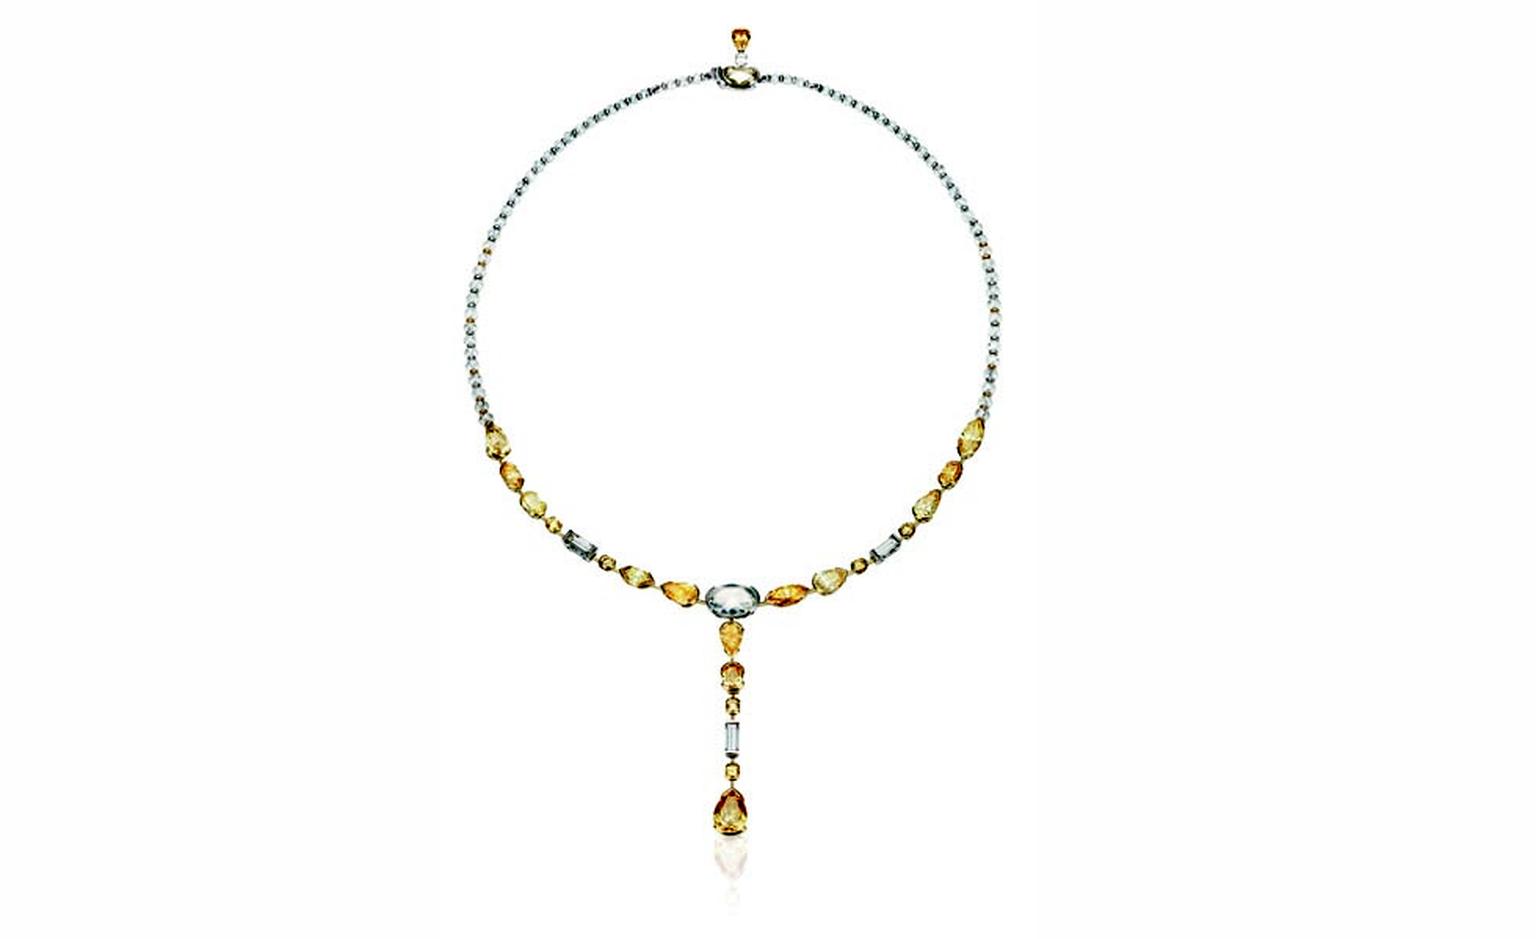 DE BEERS, Swan Lake Necklace Yellow and White Diamonds. POA